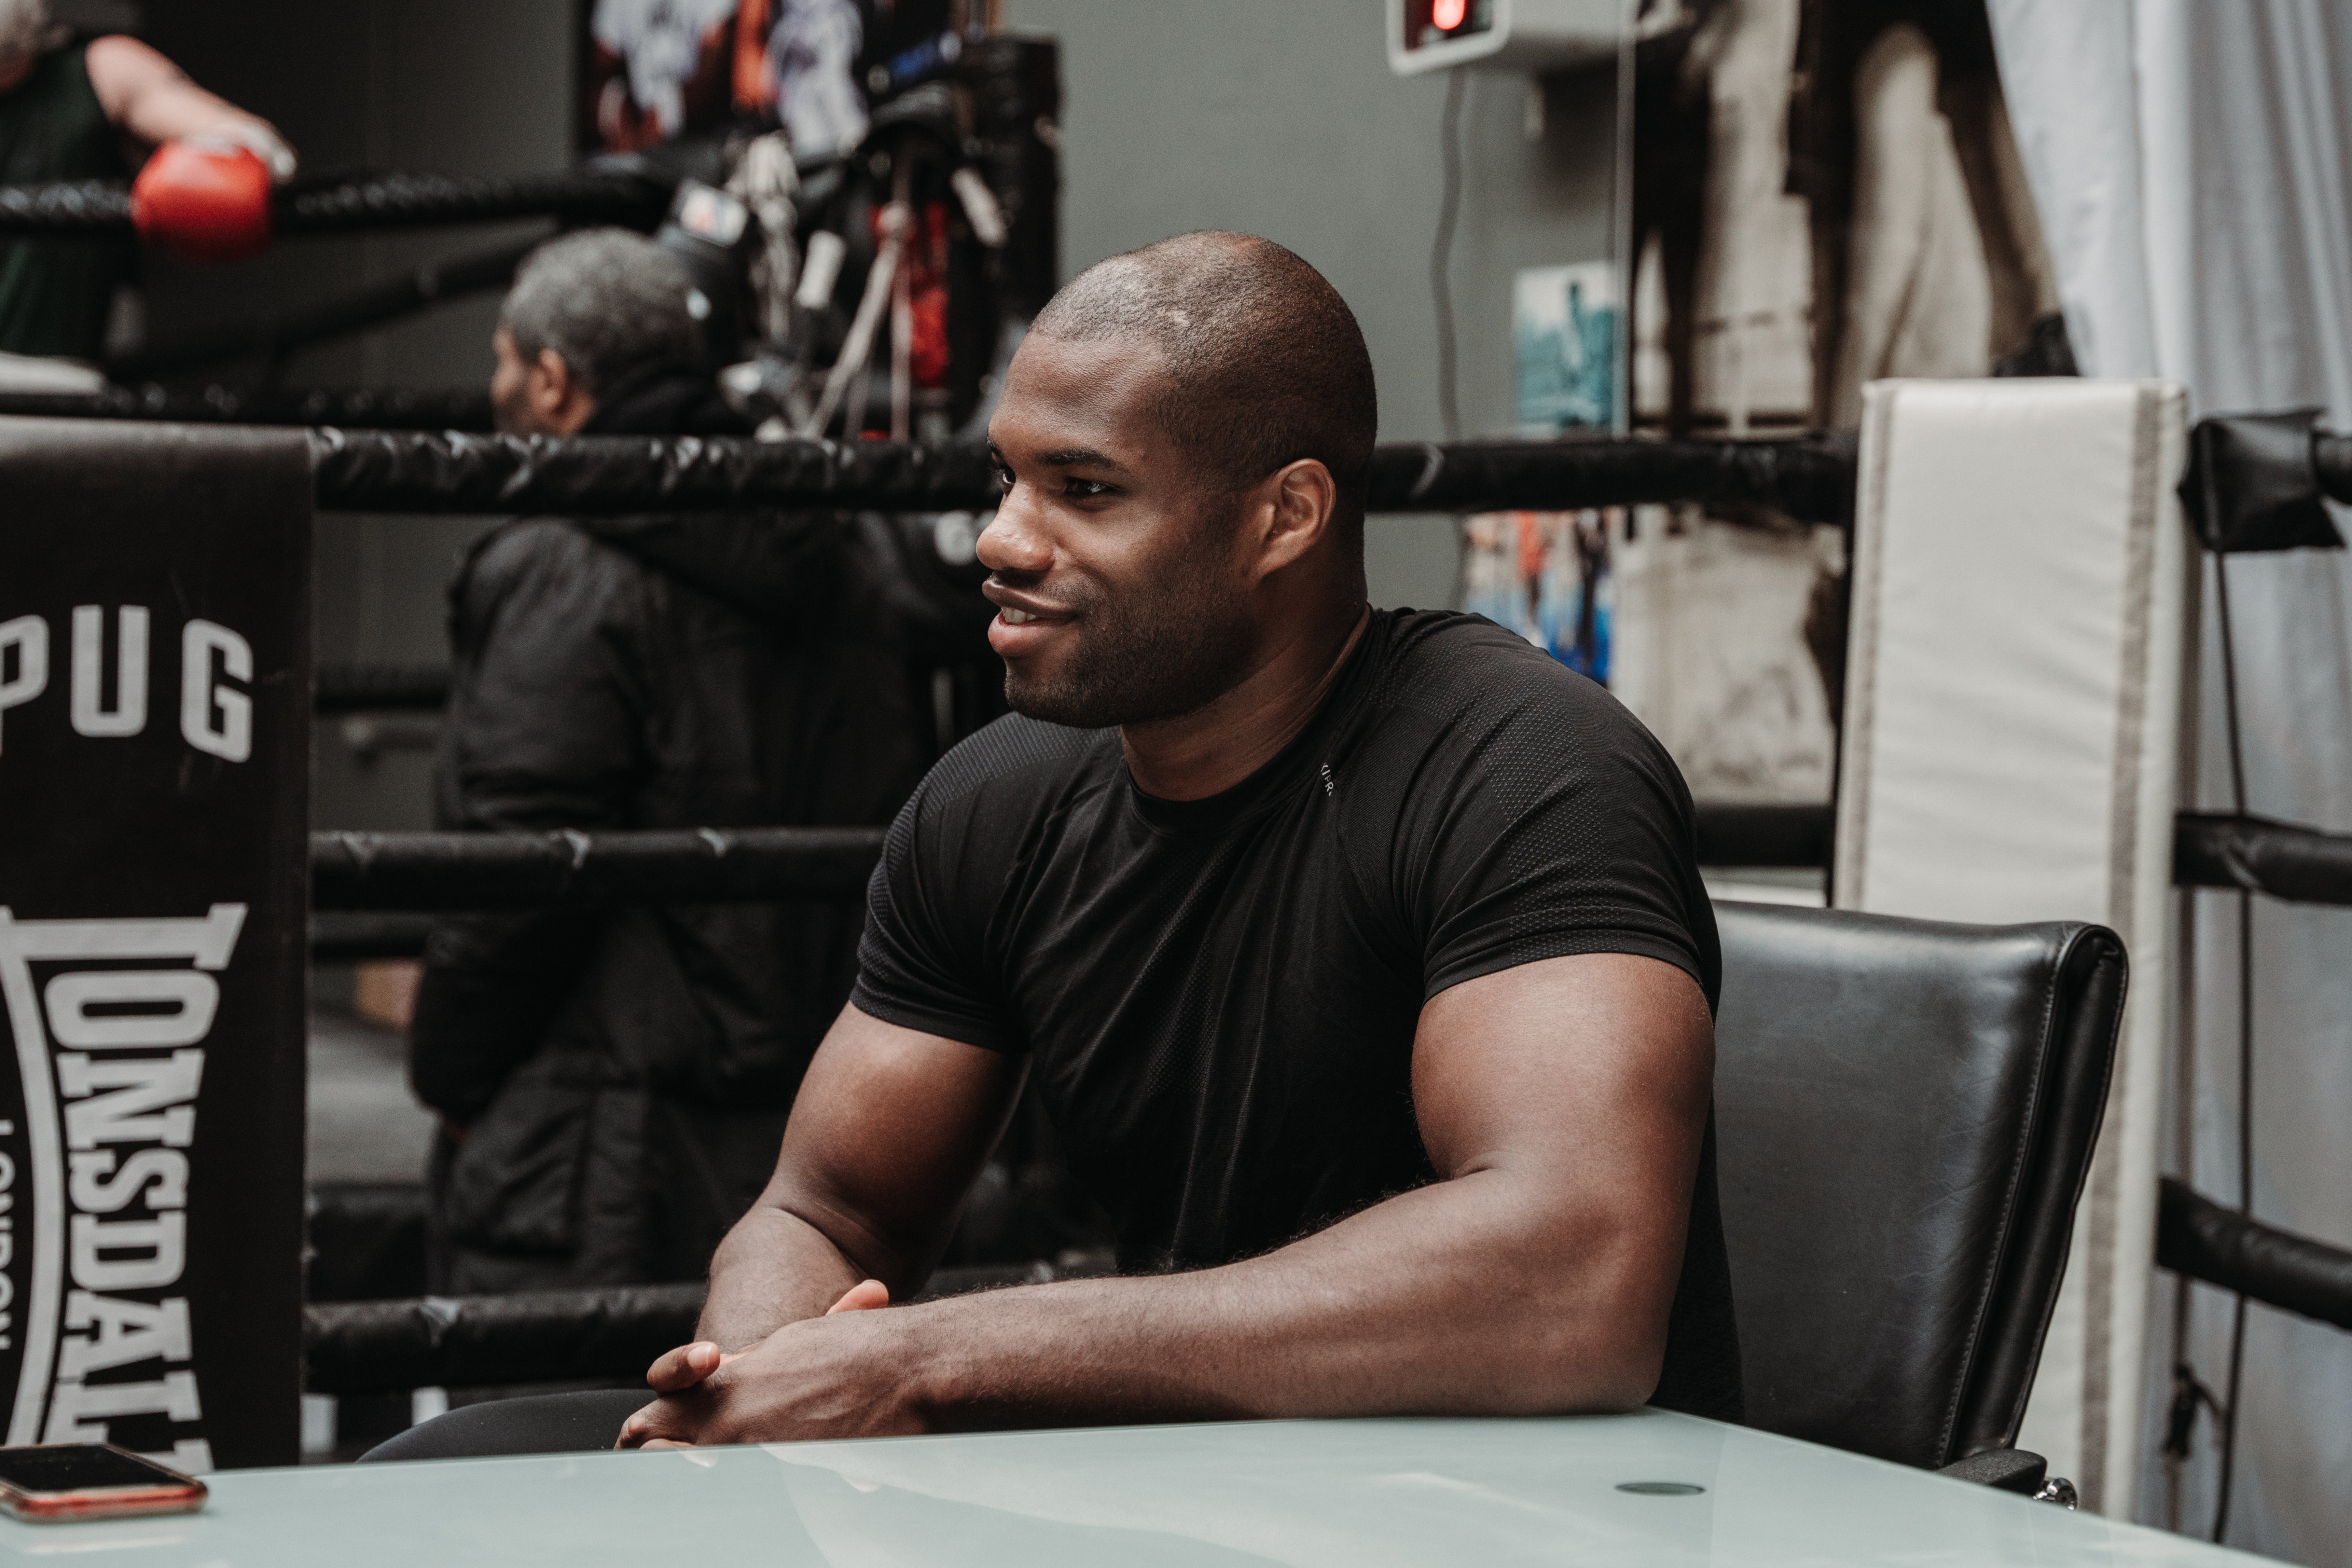 Dubois is looking to take another step towards a world title by beating Filip Hrgovic